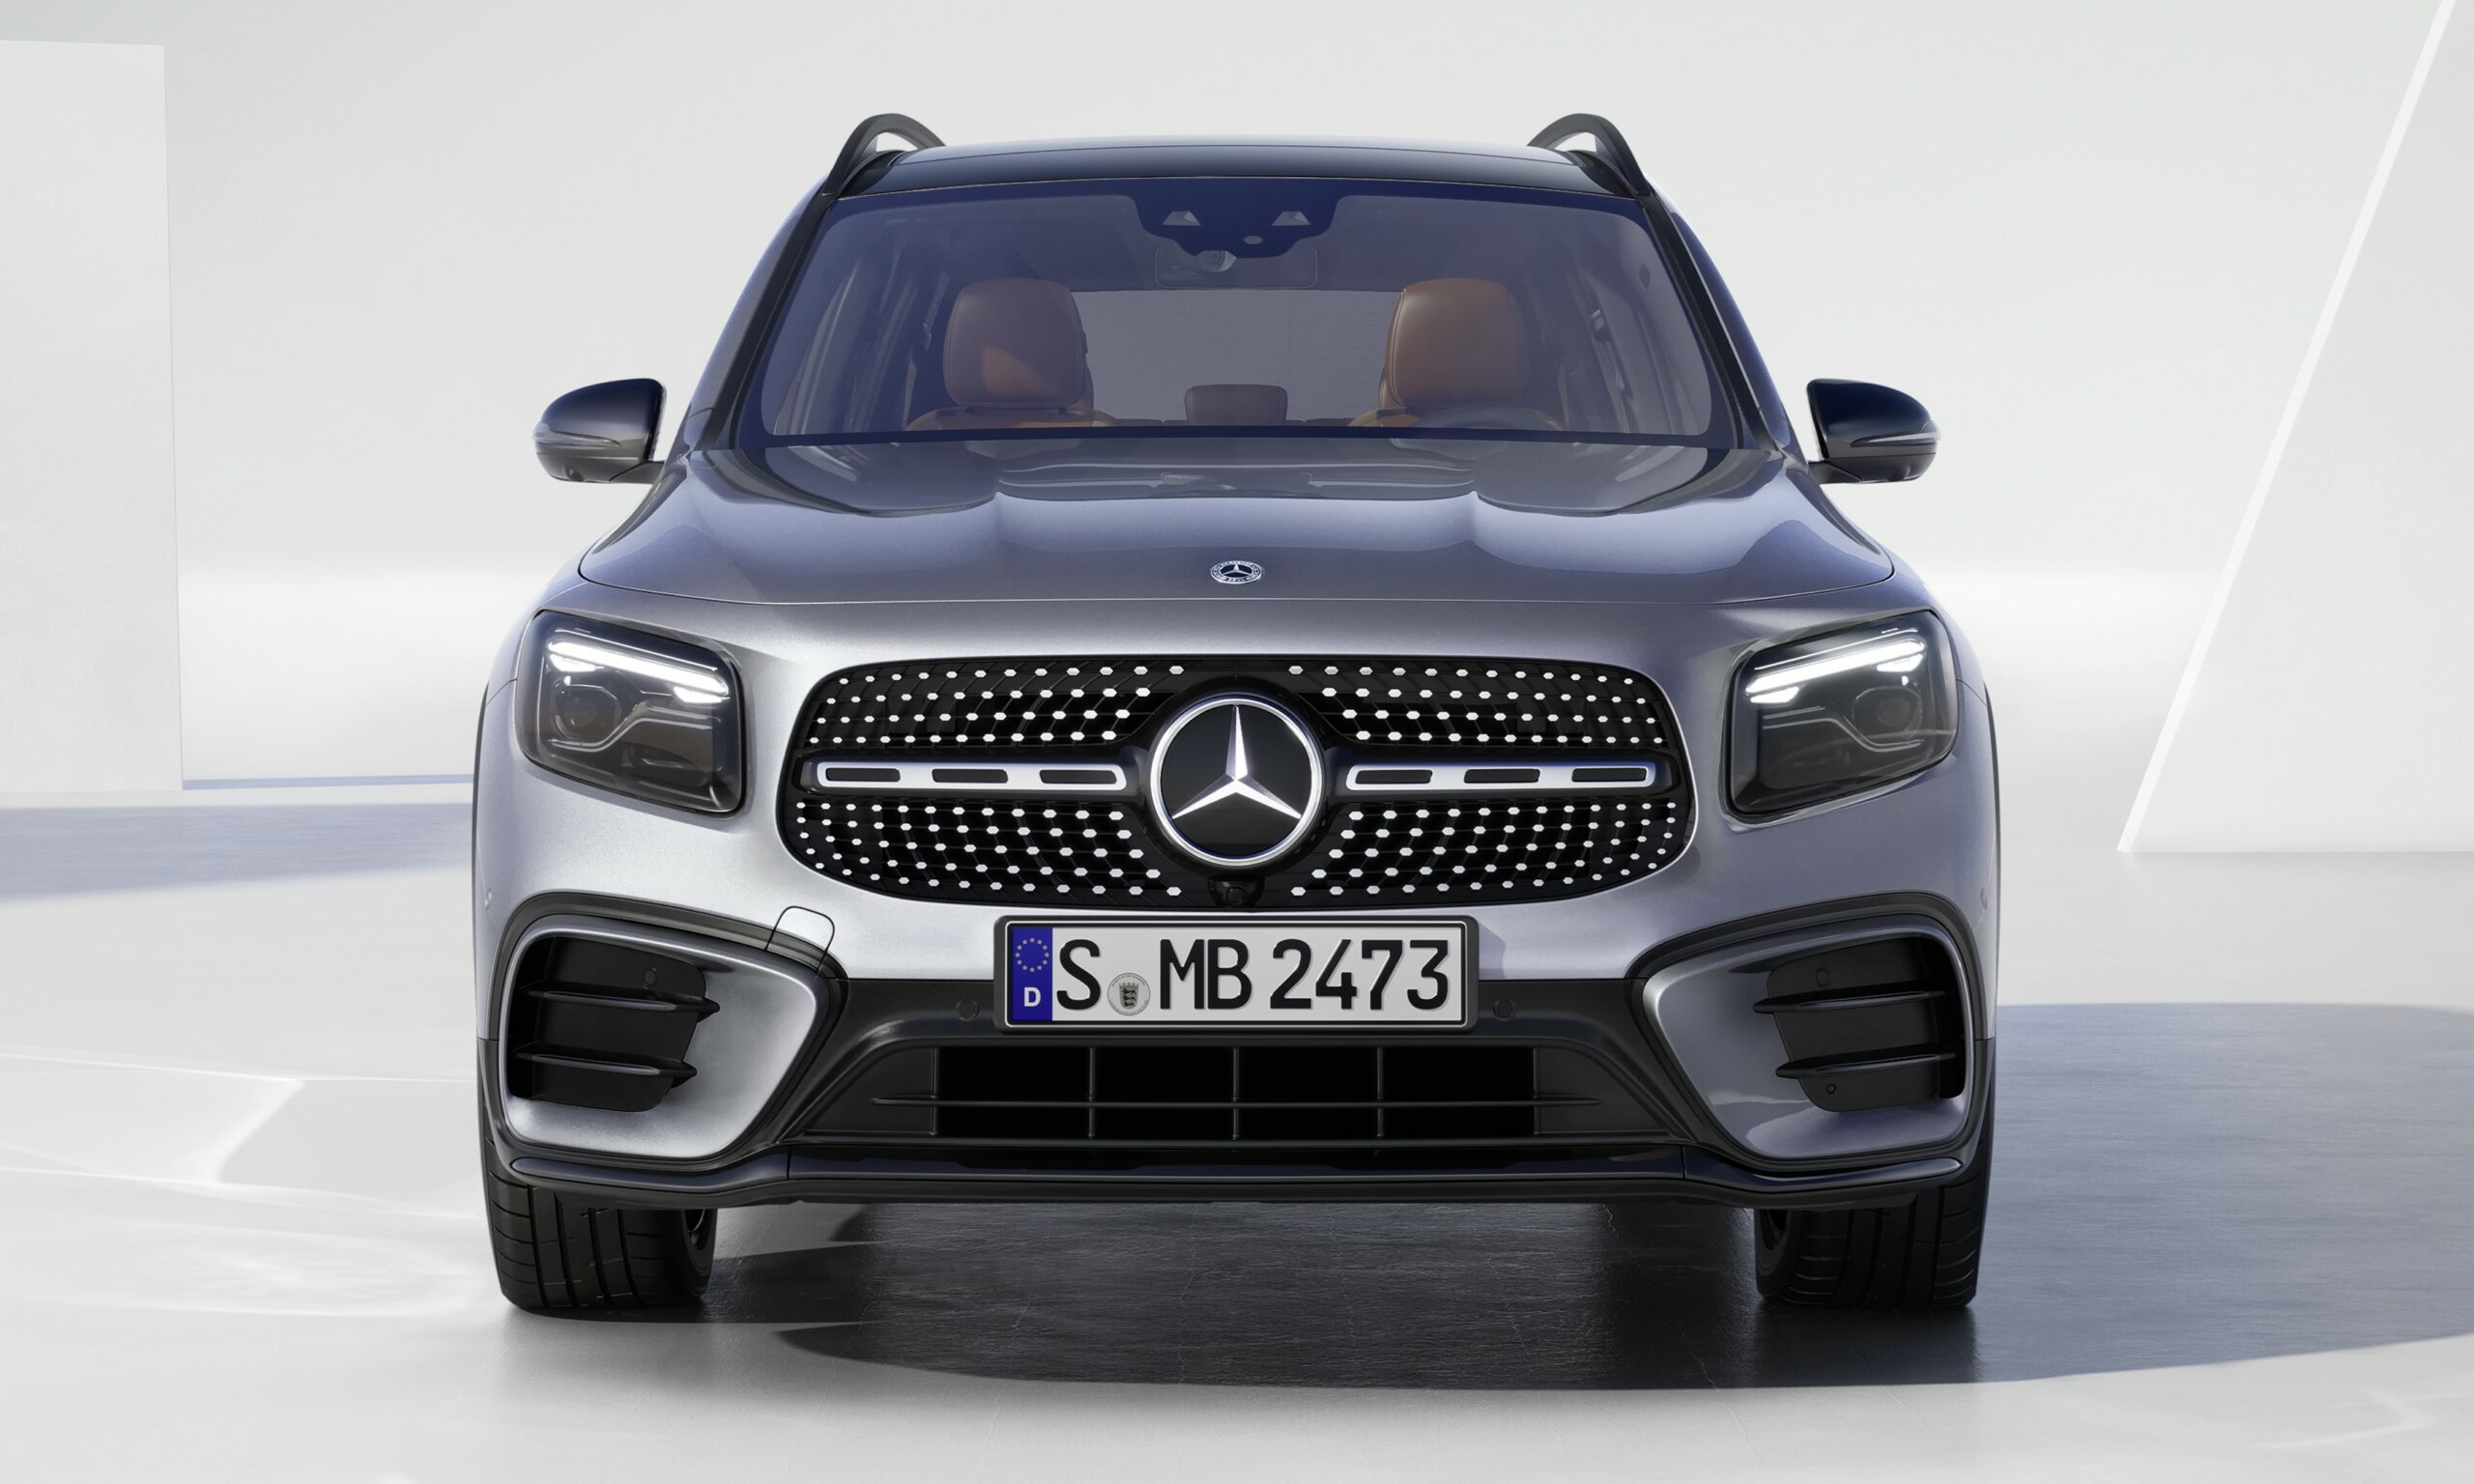 mercedes-benz, mercedes-benz glb, facelifted mercedes-benz glb revealed – new features and electrified engines